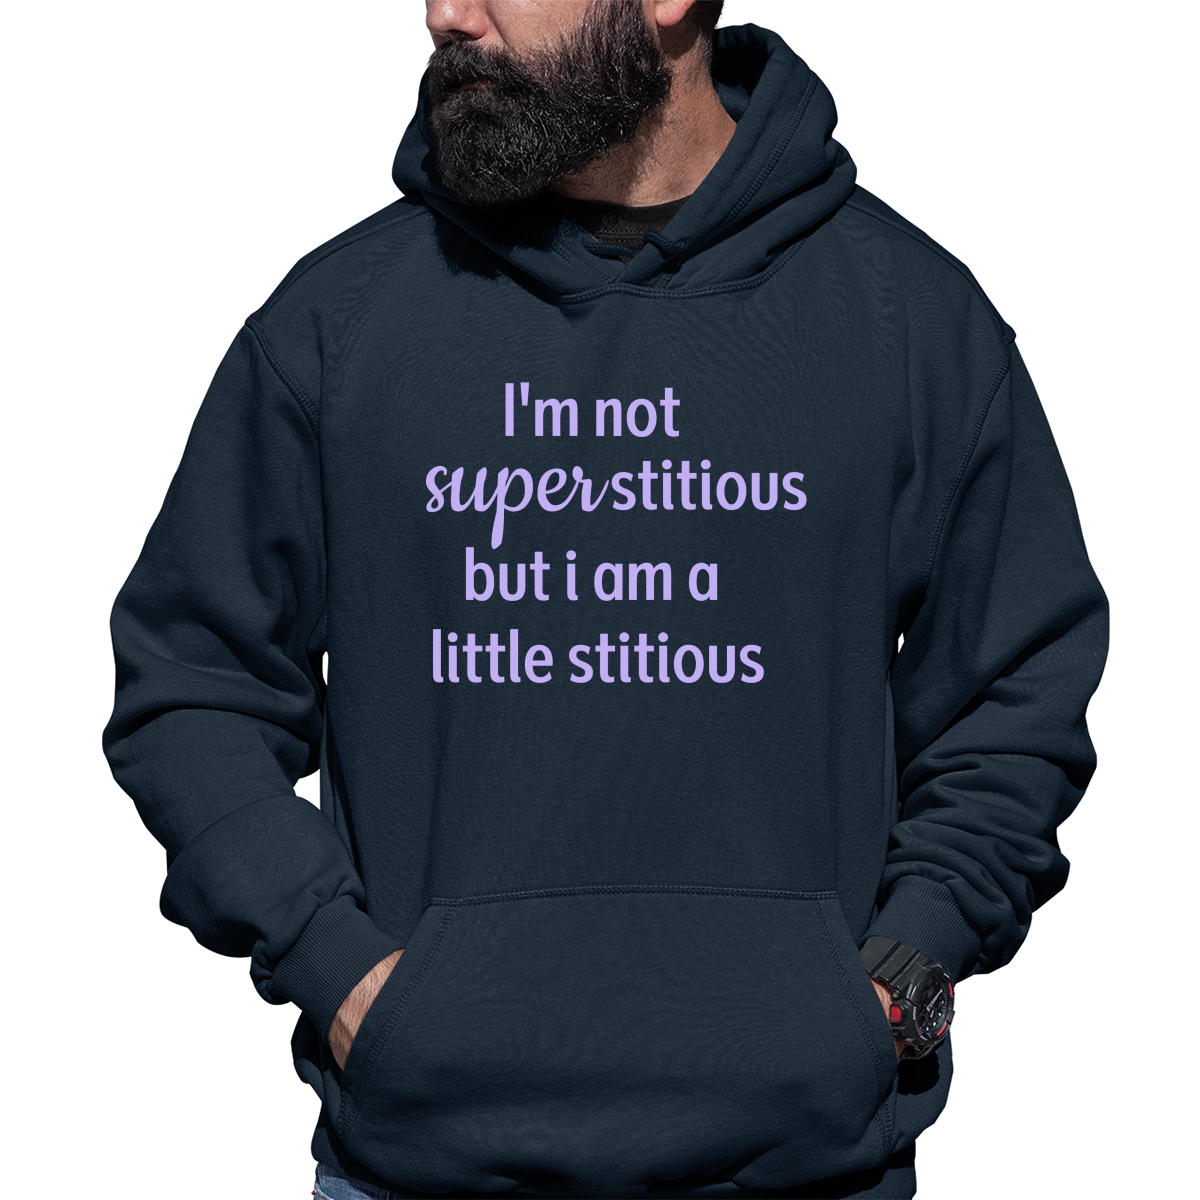 I'm Not Superstitious but I am a Little Stitious Unisex Hoodie | Navy